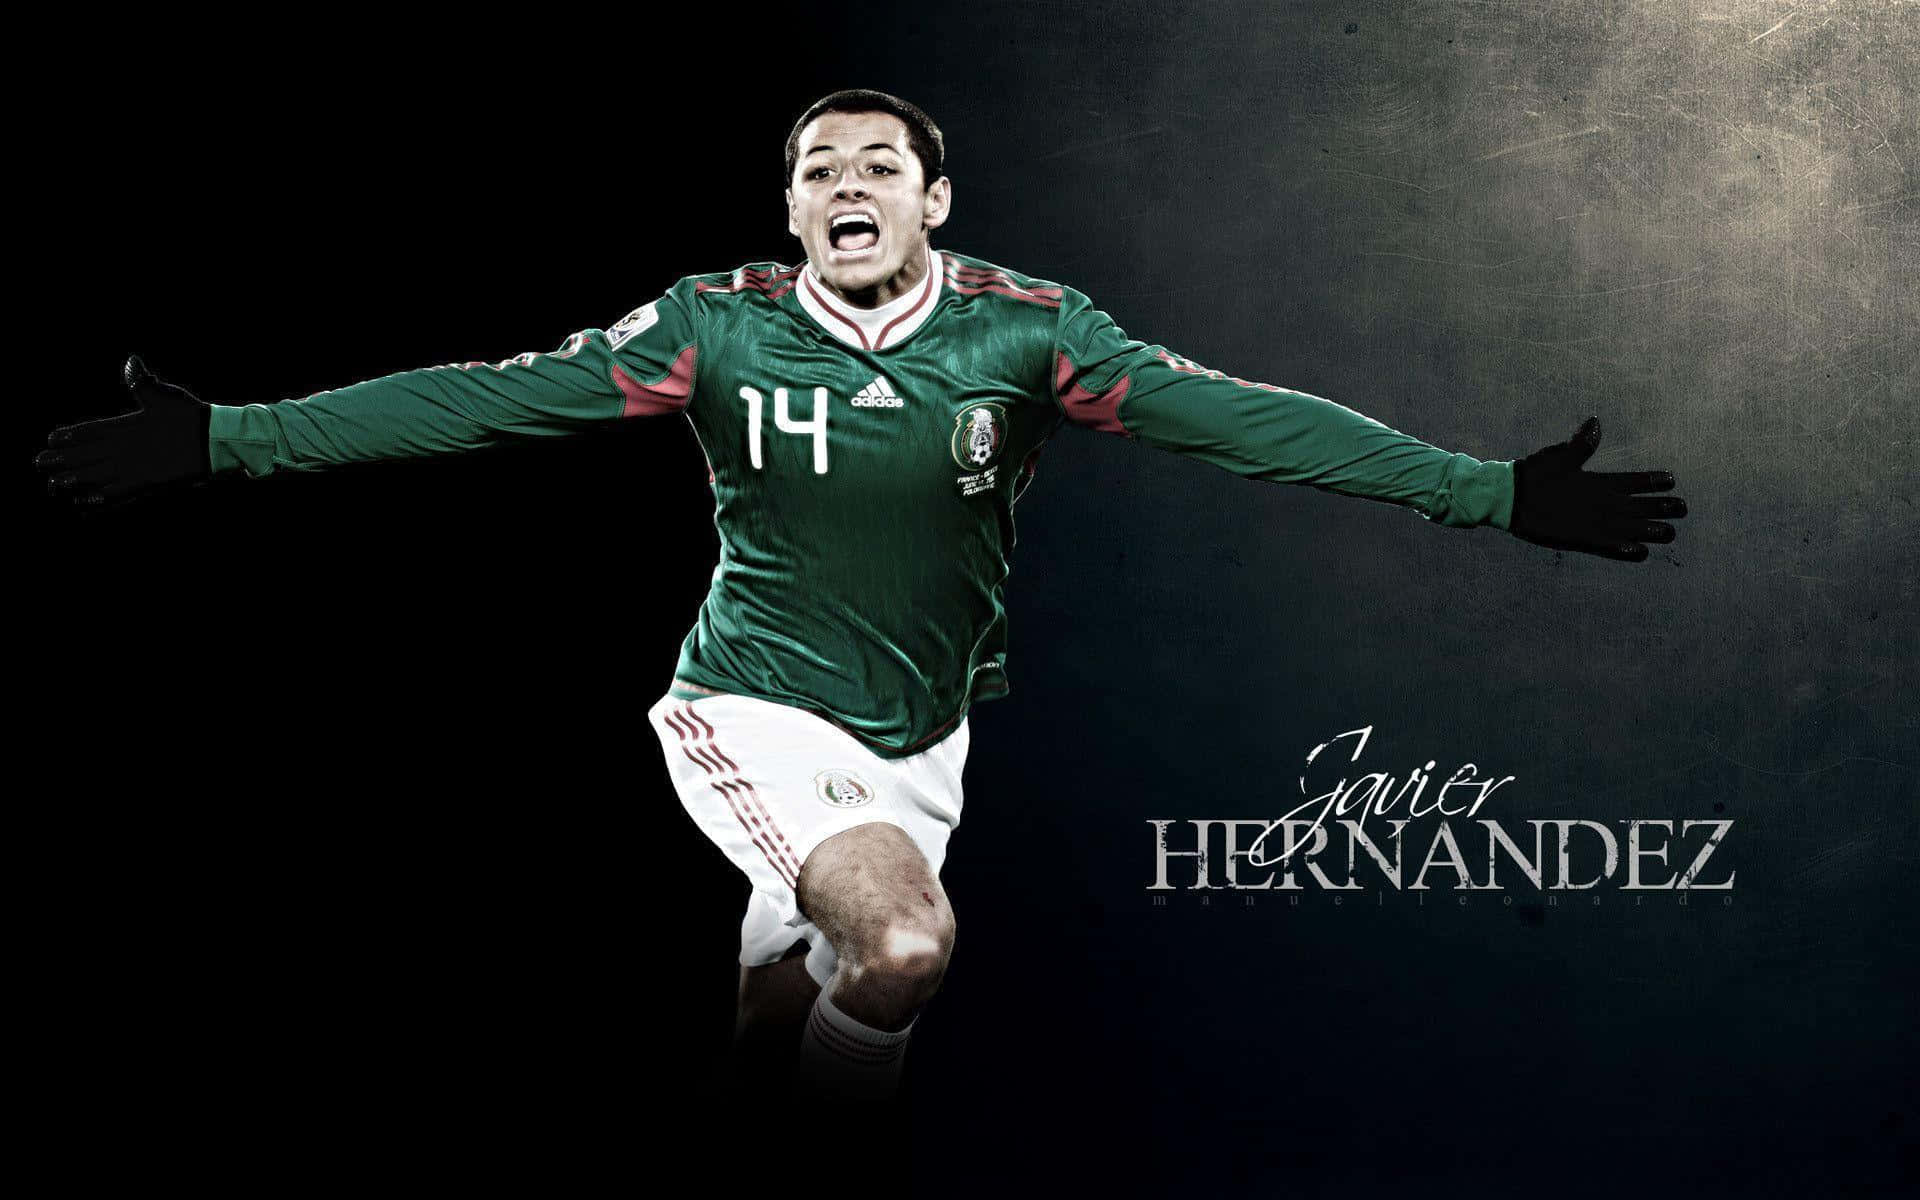 Mexico Soccer Player Hernández Is Shown In A Dark Background Wallpaper